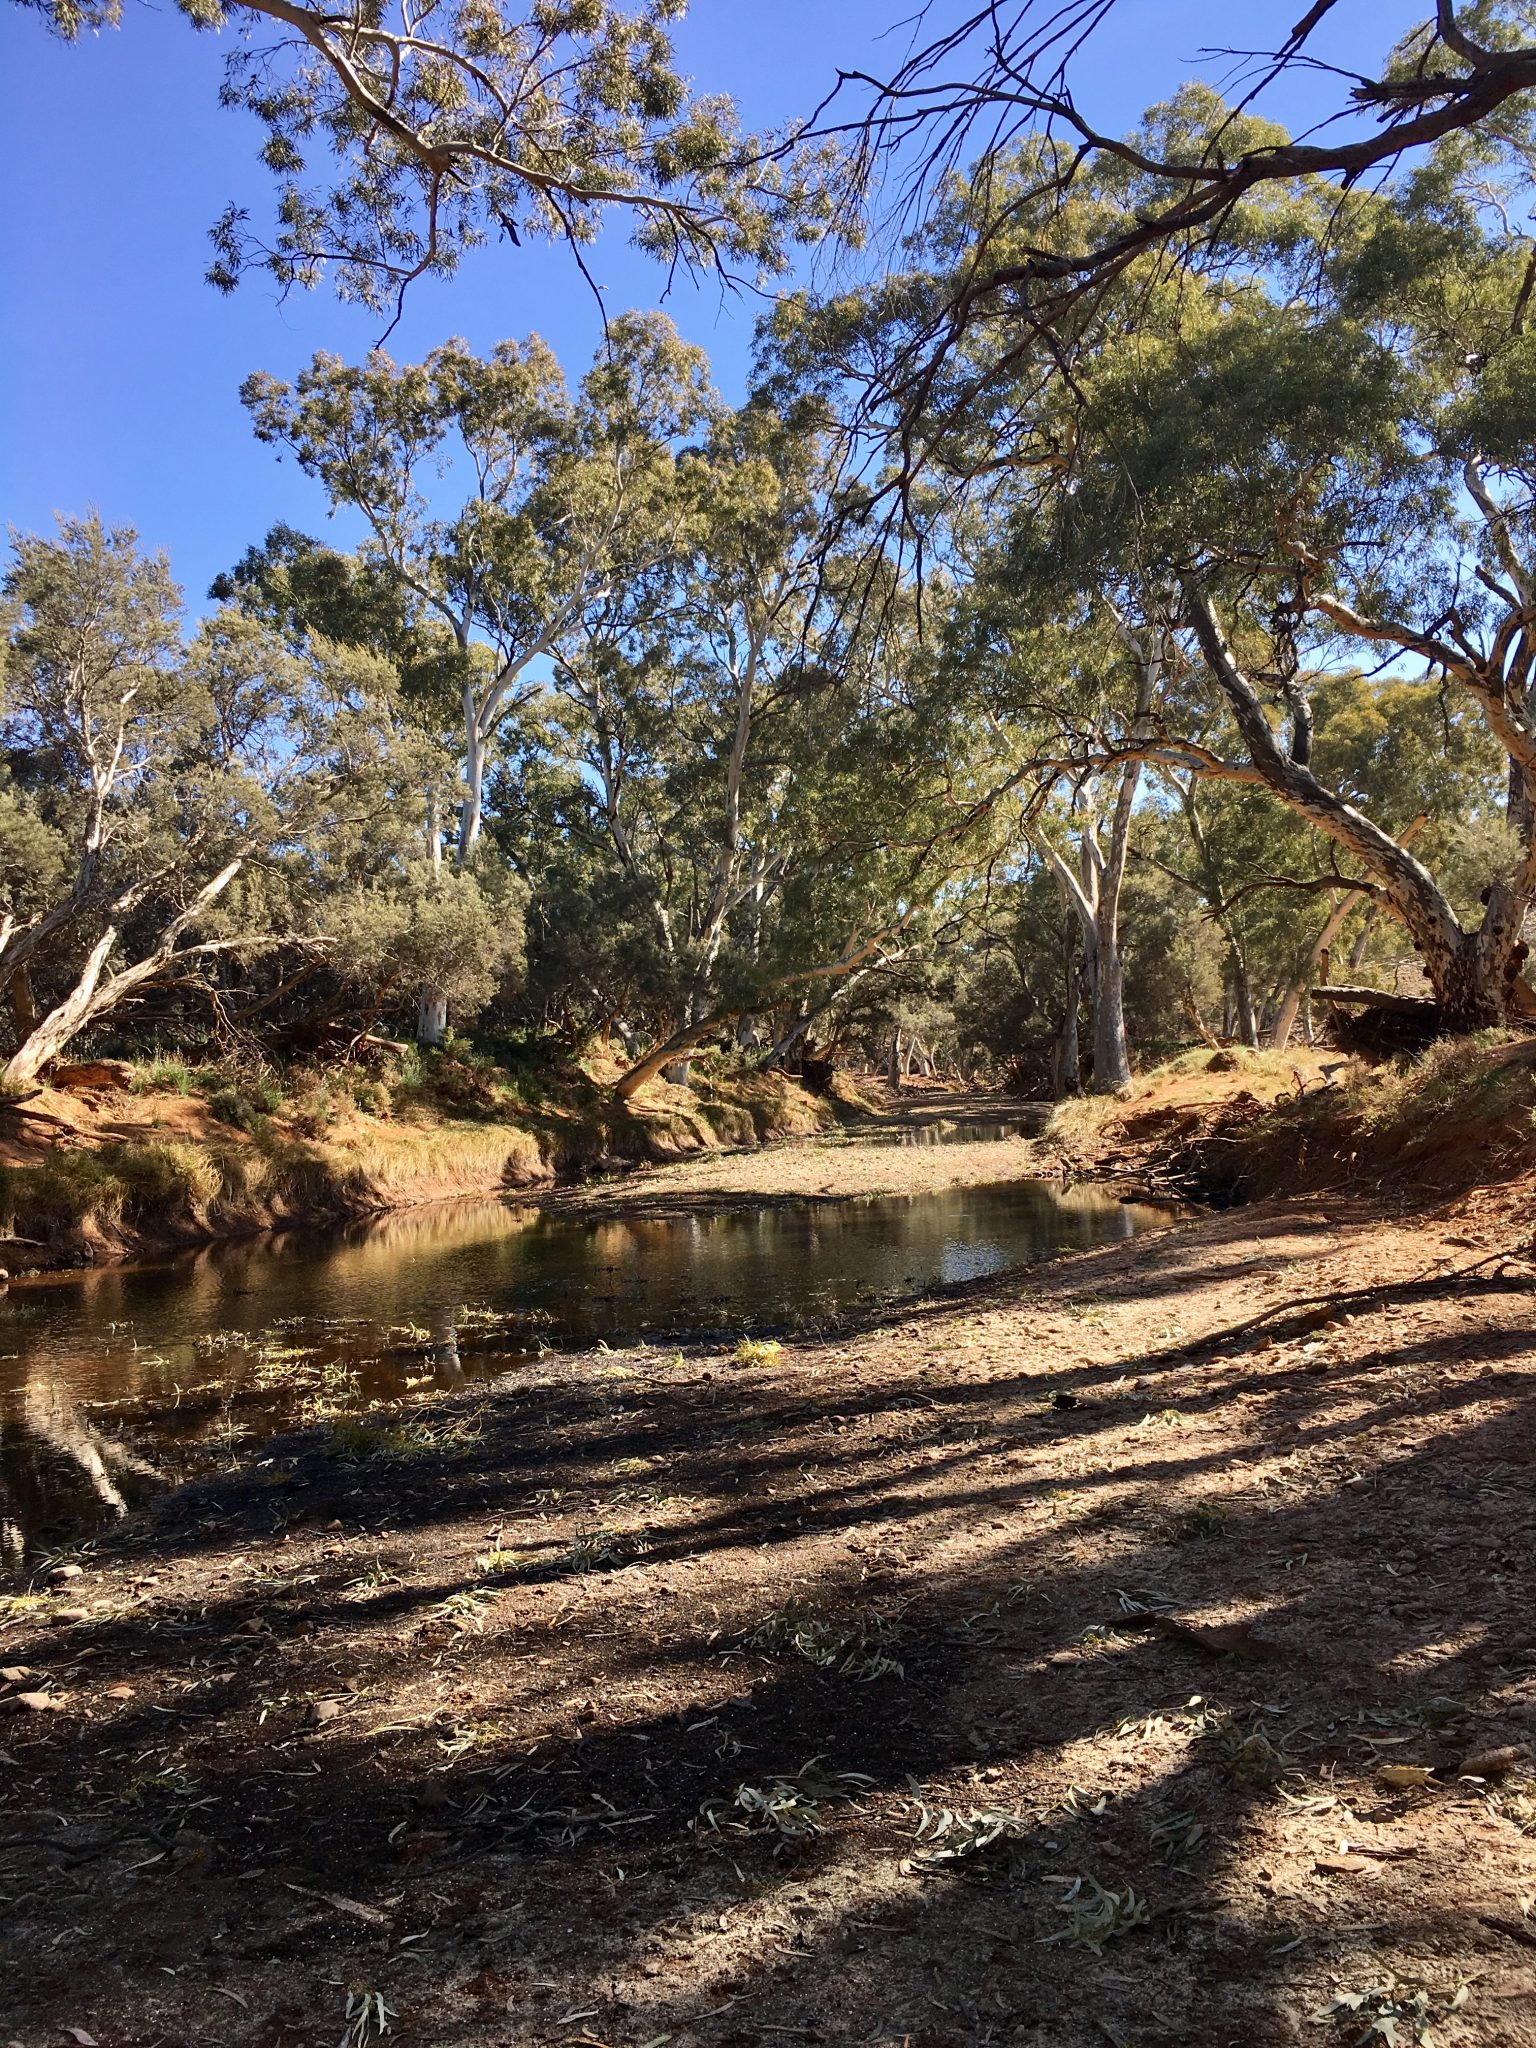 The riverbed of the Frome River in the Flinders Ranges